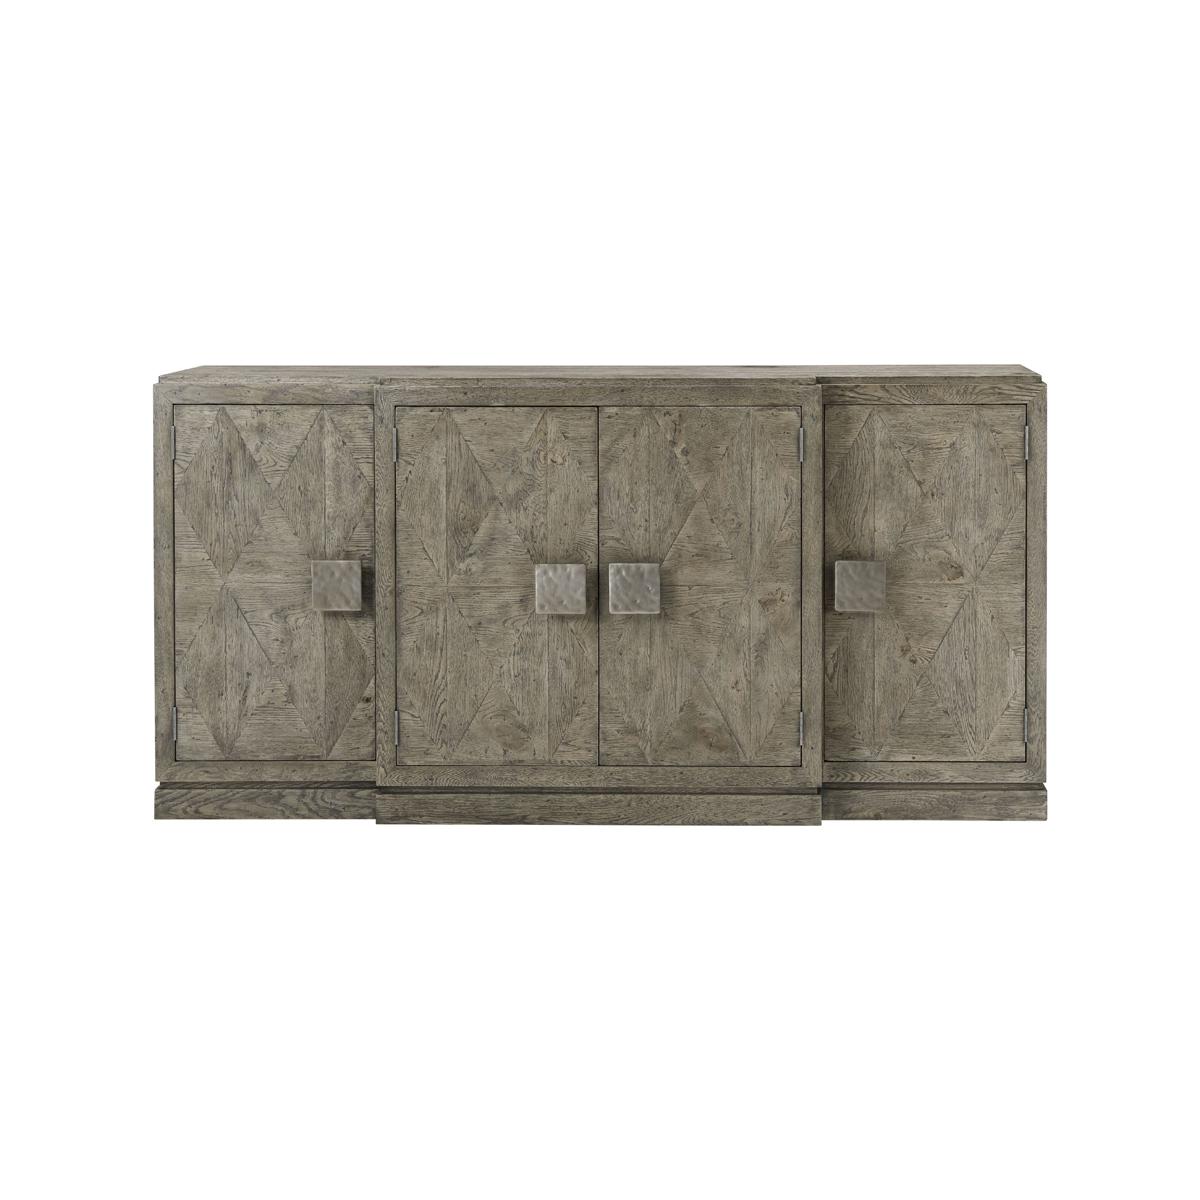 With four doors having bold 'vintage' metal handles with three sections and interiors with adjustable shelves, the center section with a fixed drawer and credenza raised on a plinth base.

Dimensions: 80.5